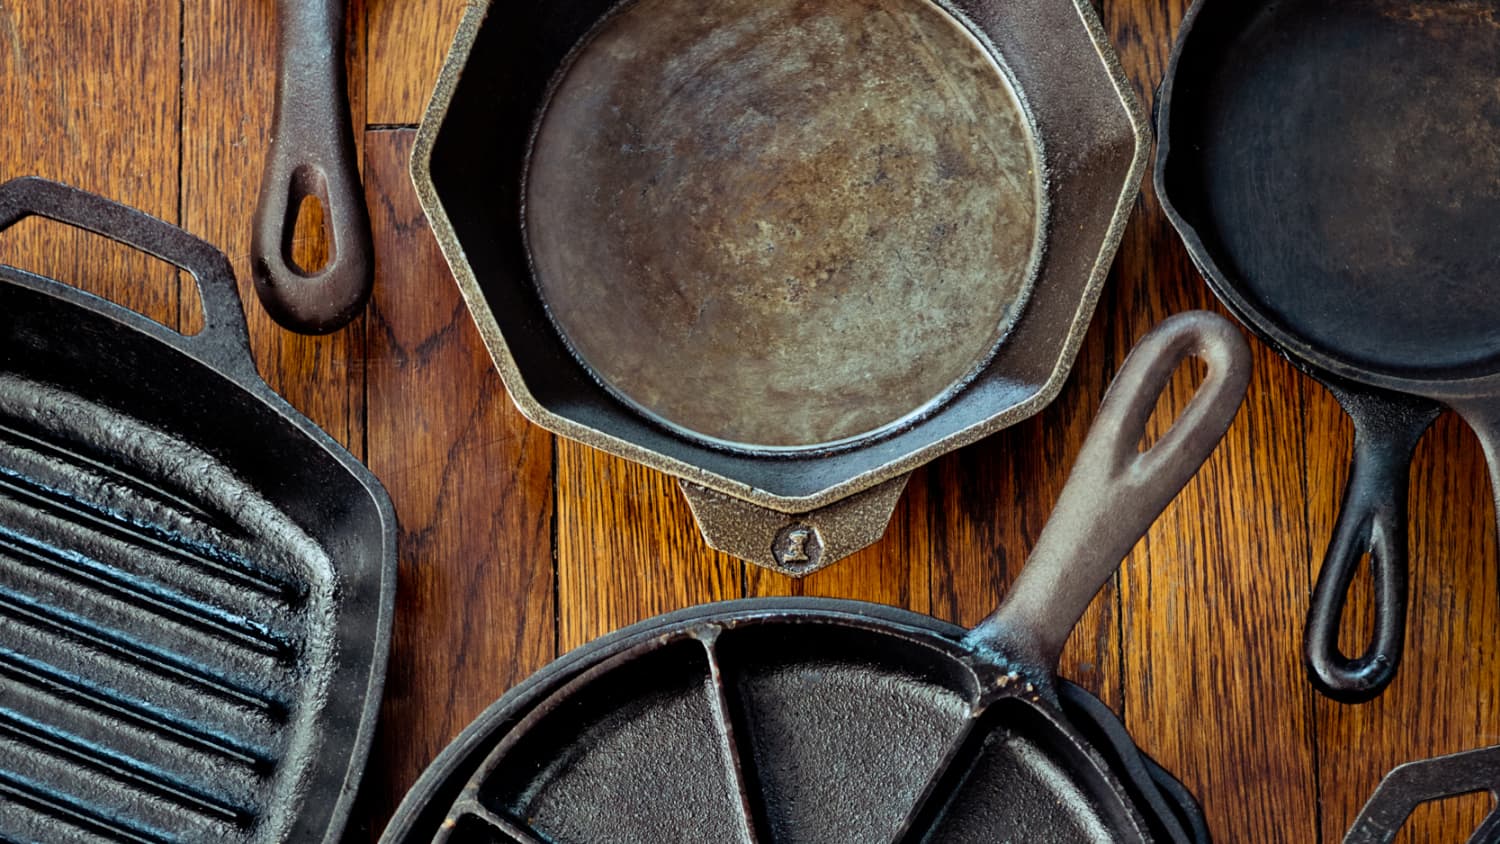 Easy Kitchen Tips - How to Care for a Cast Iron Skillet - One Hundred  Dollars a Month